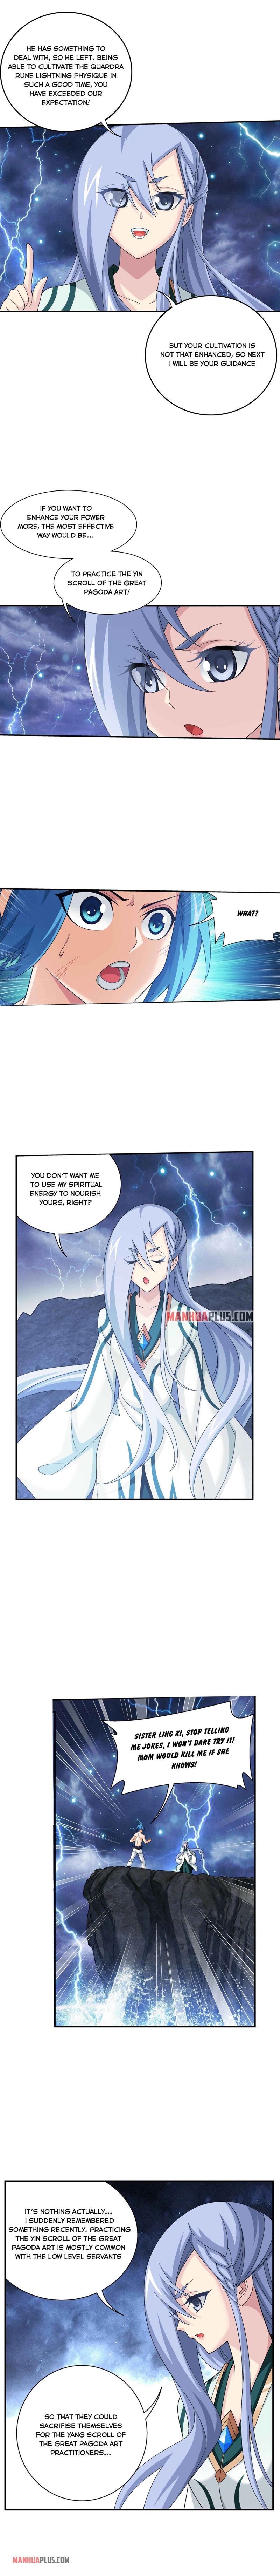 The Great Ruler Chapter 275 page 7